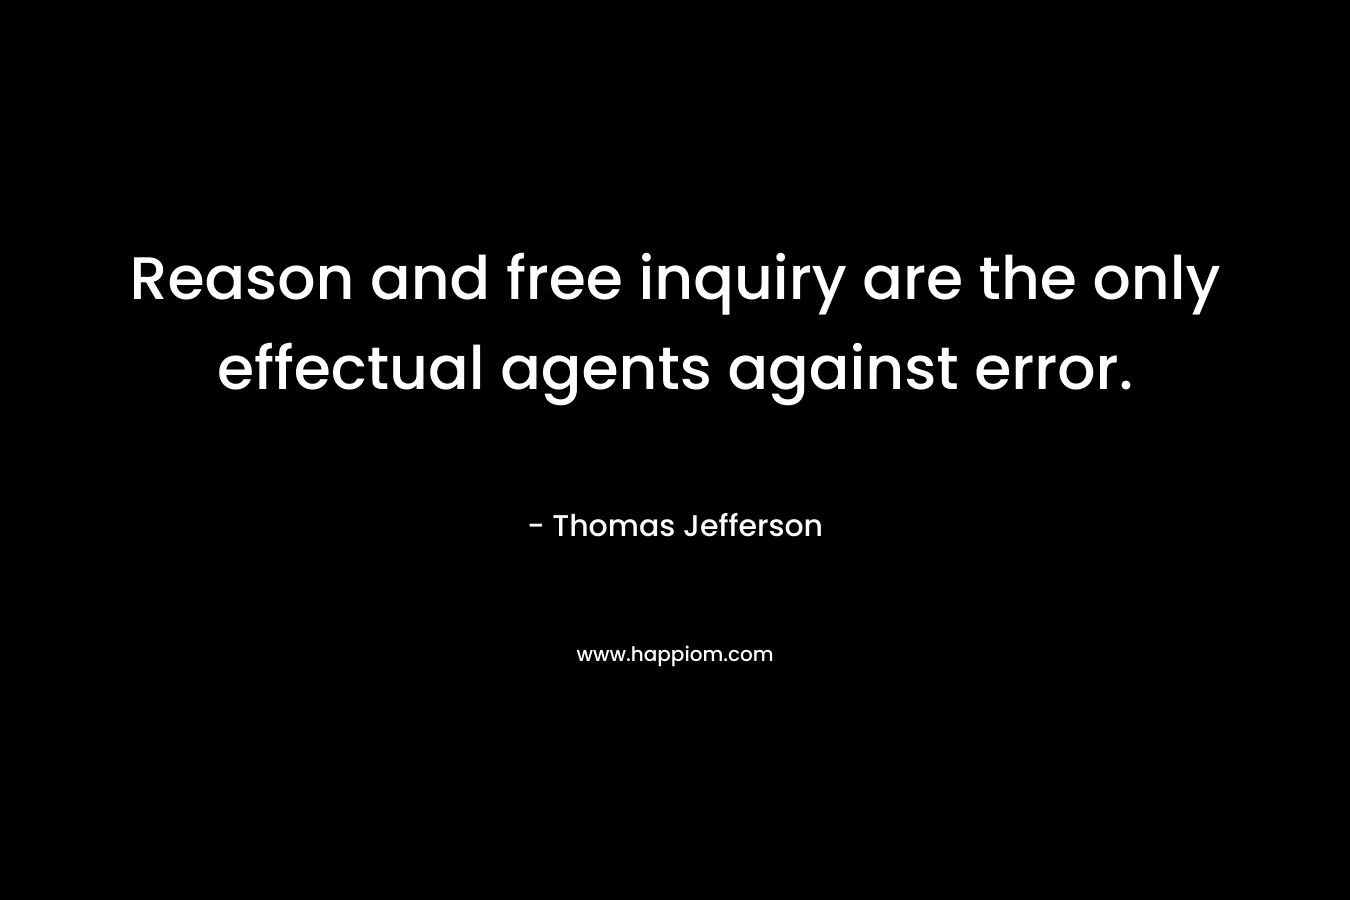 Reason and free inquiry are the only effectual agents against error. – Thomas Jefferson